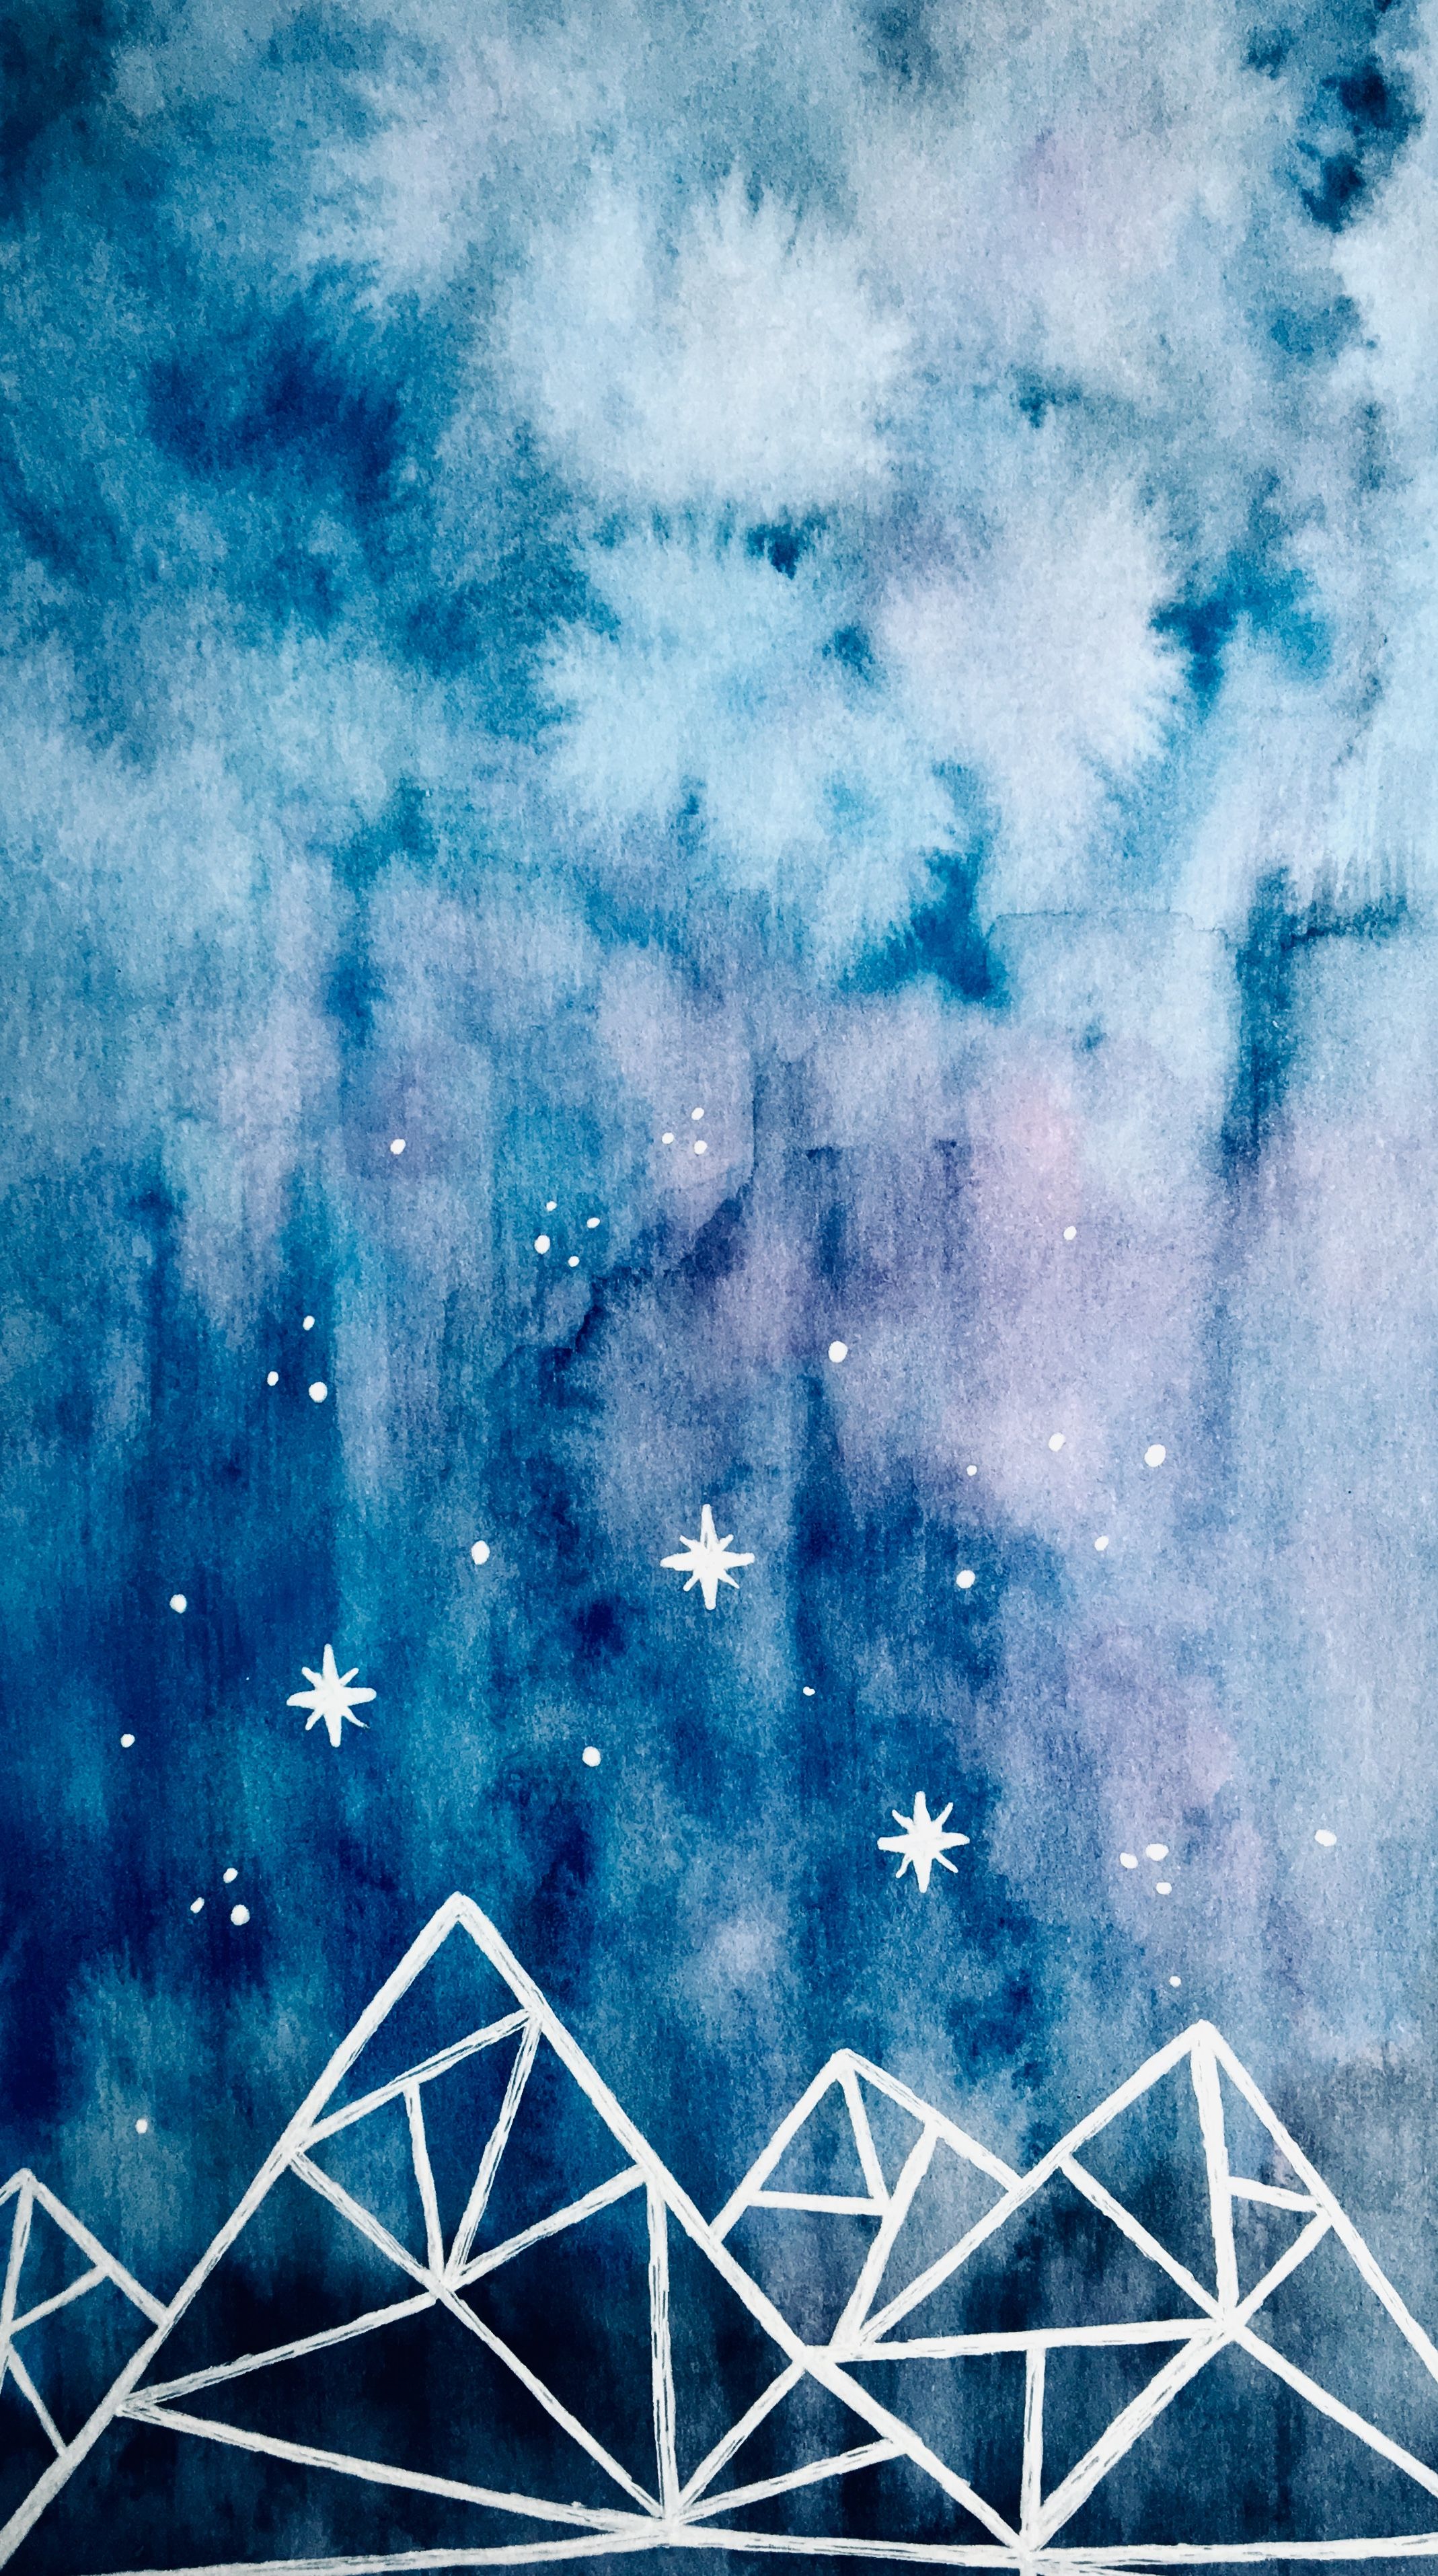 Acotar background. Watercolor night sky, City wallpaper, Background